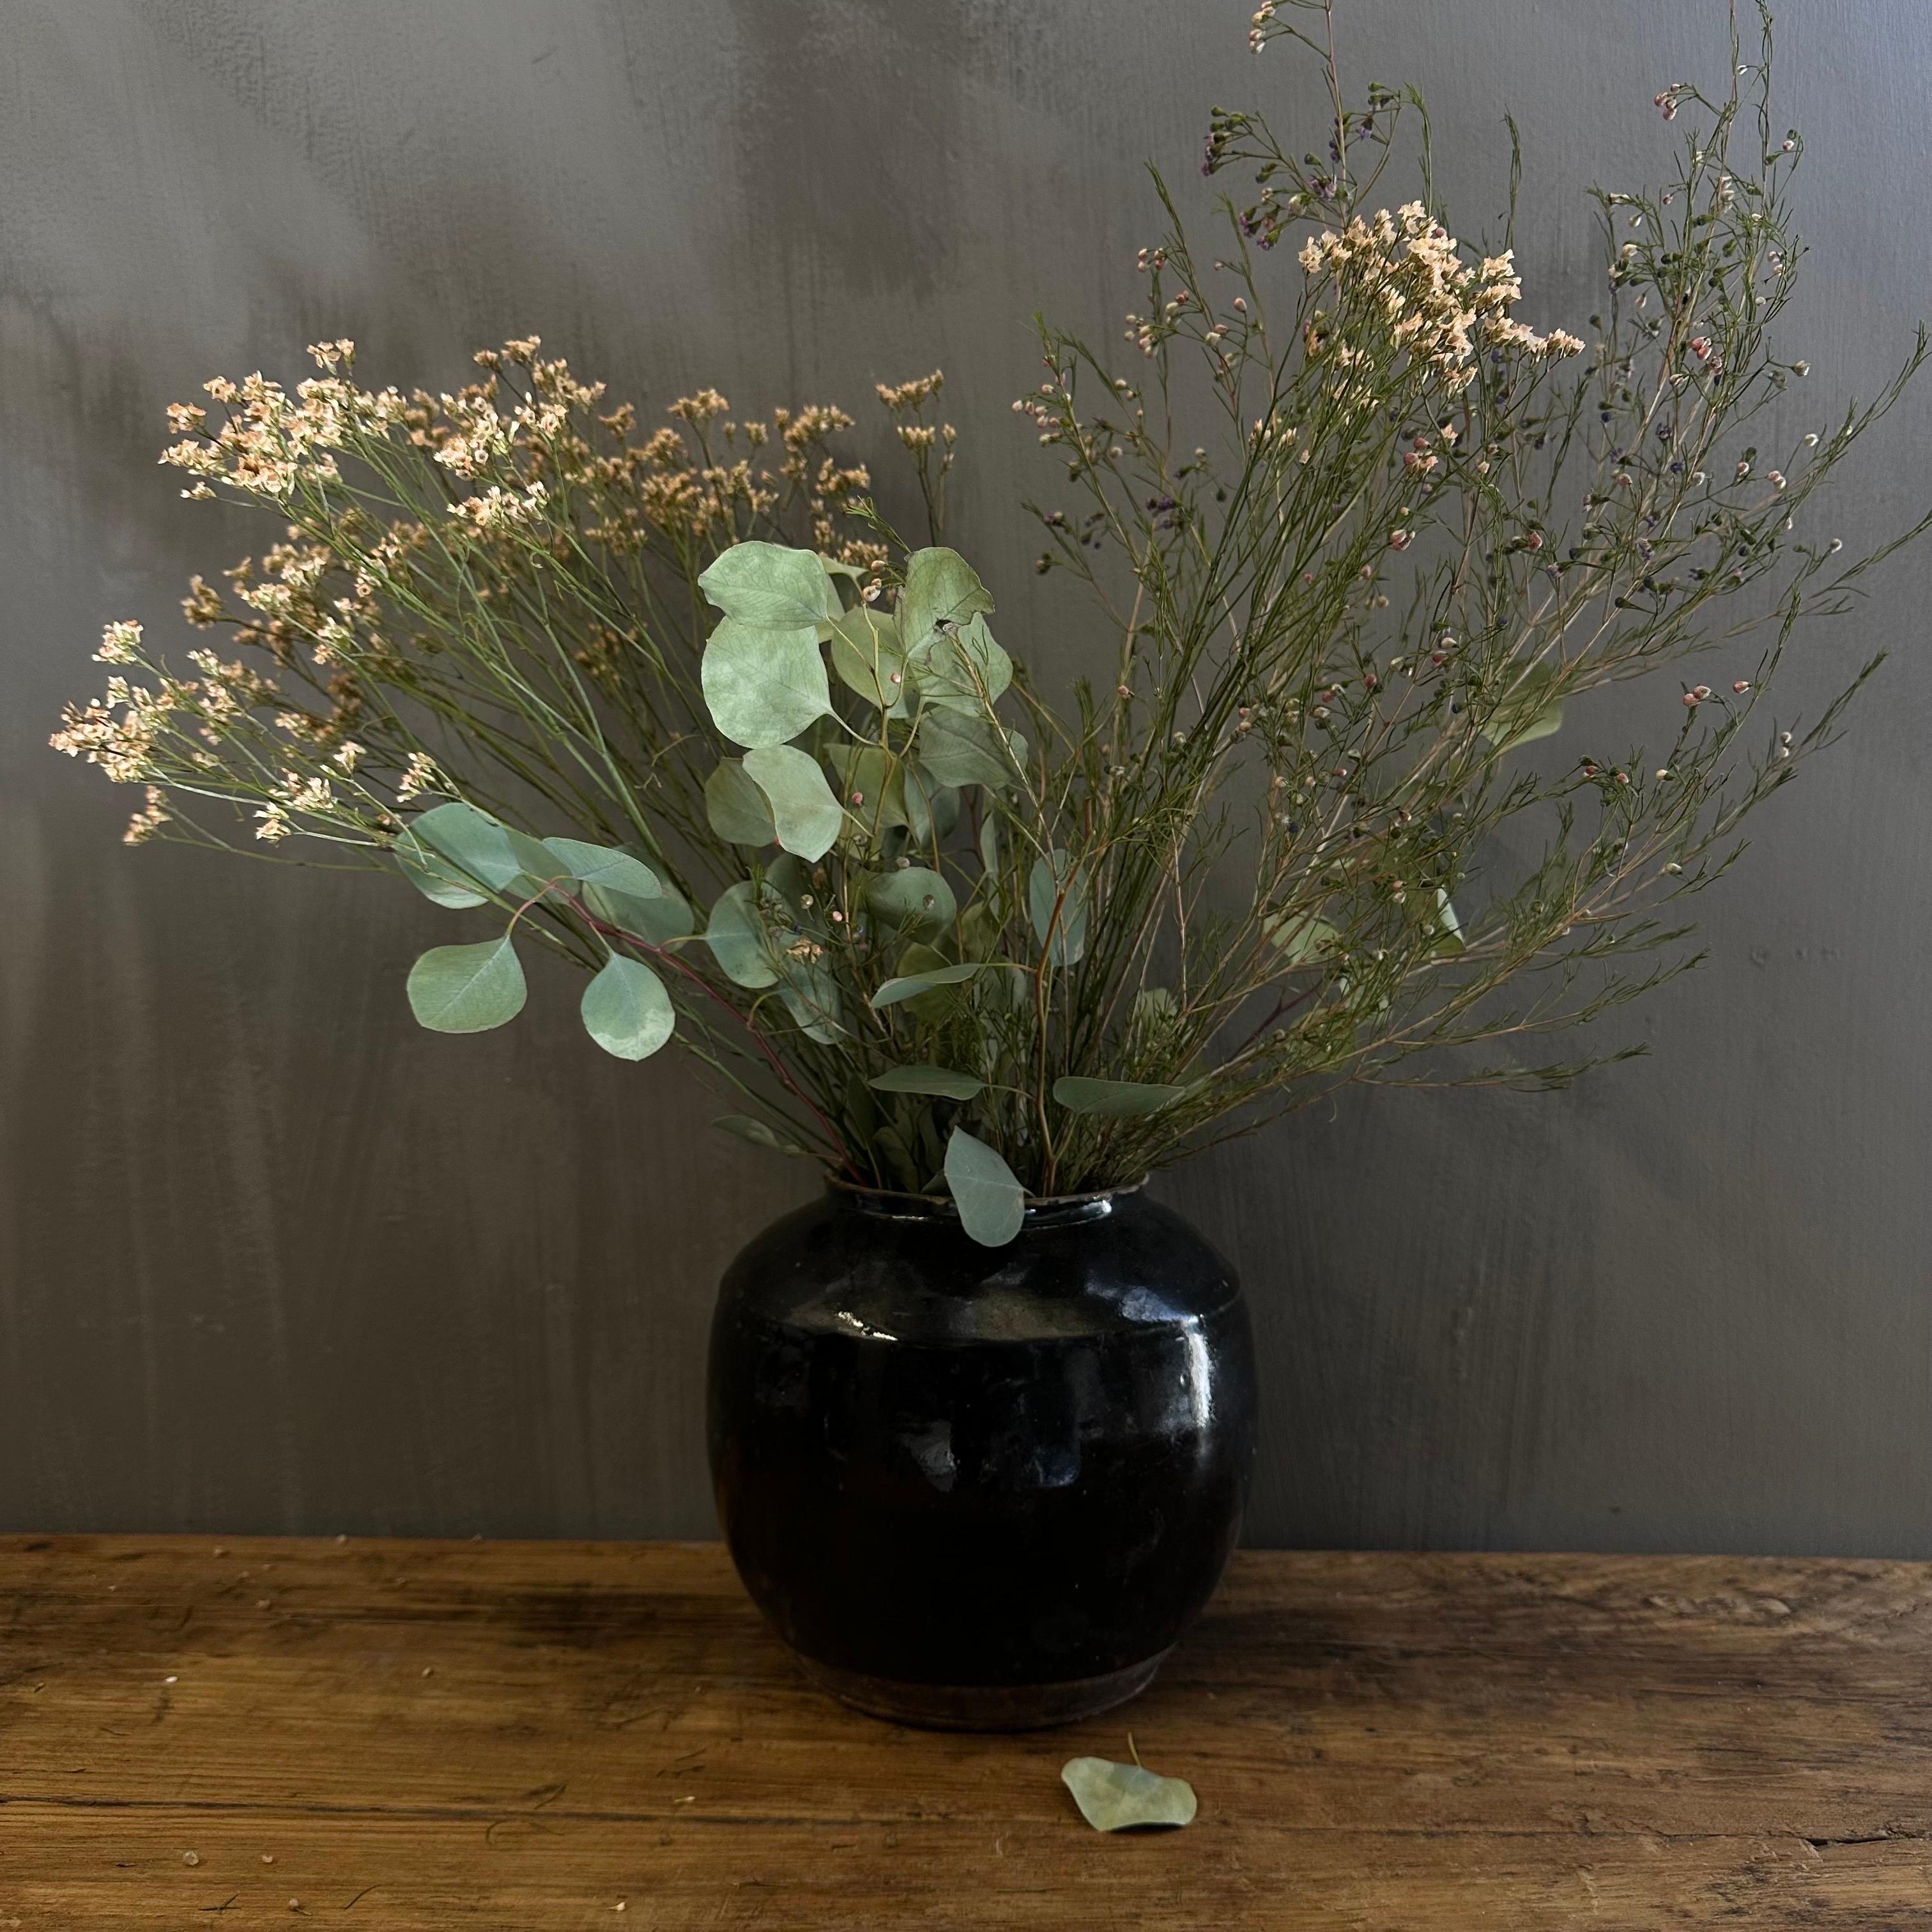 Vintage pottery beautiful and rich in character, this vintage oil pot adds just the right amount of texture + warmth where you need it. Stunning glazed black finish with warm terra-cotta accents. Some have a more faded appearance than others, each